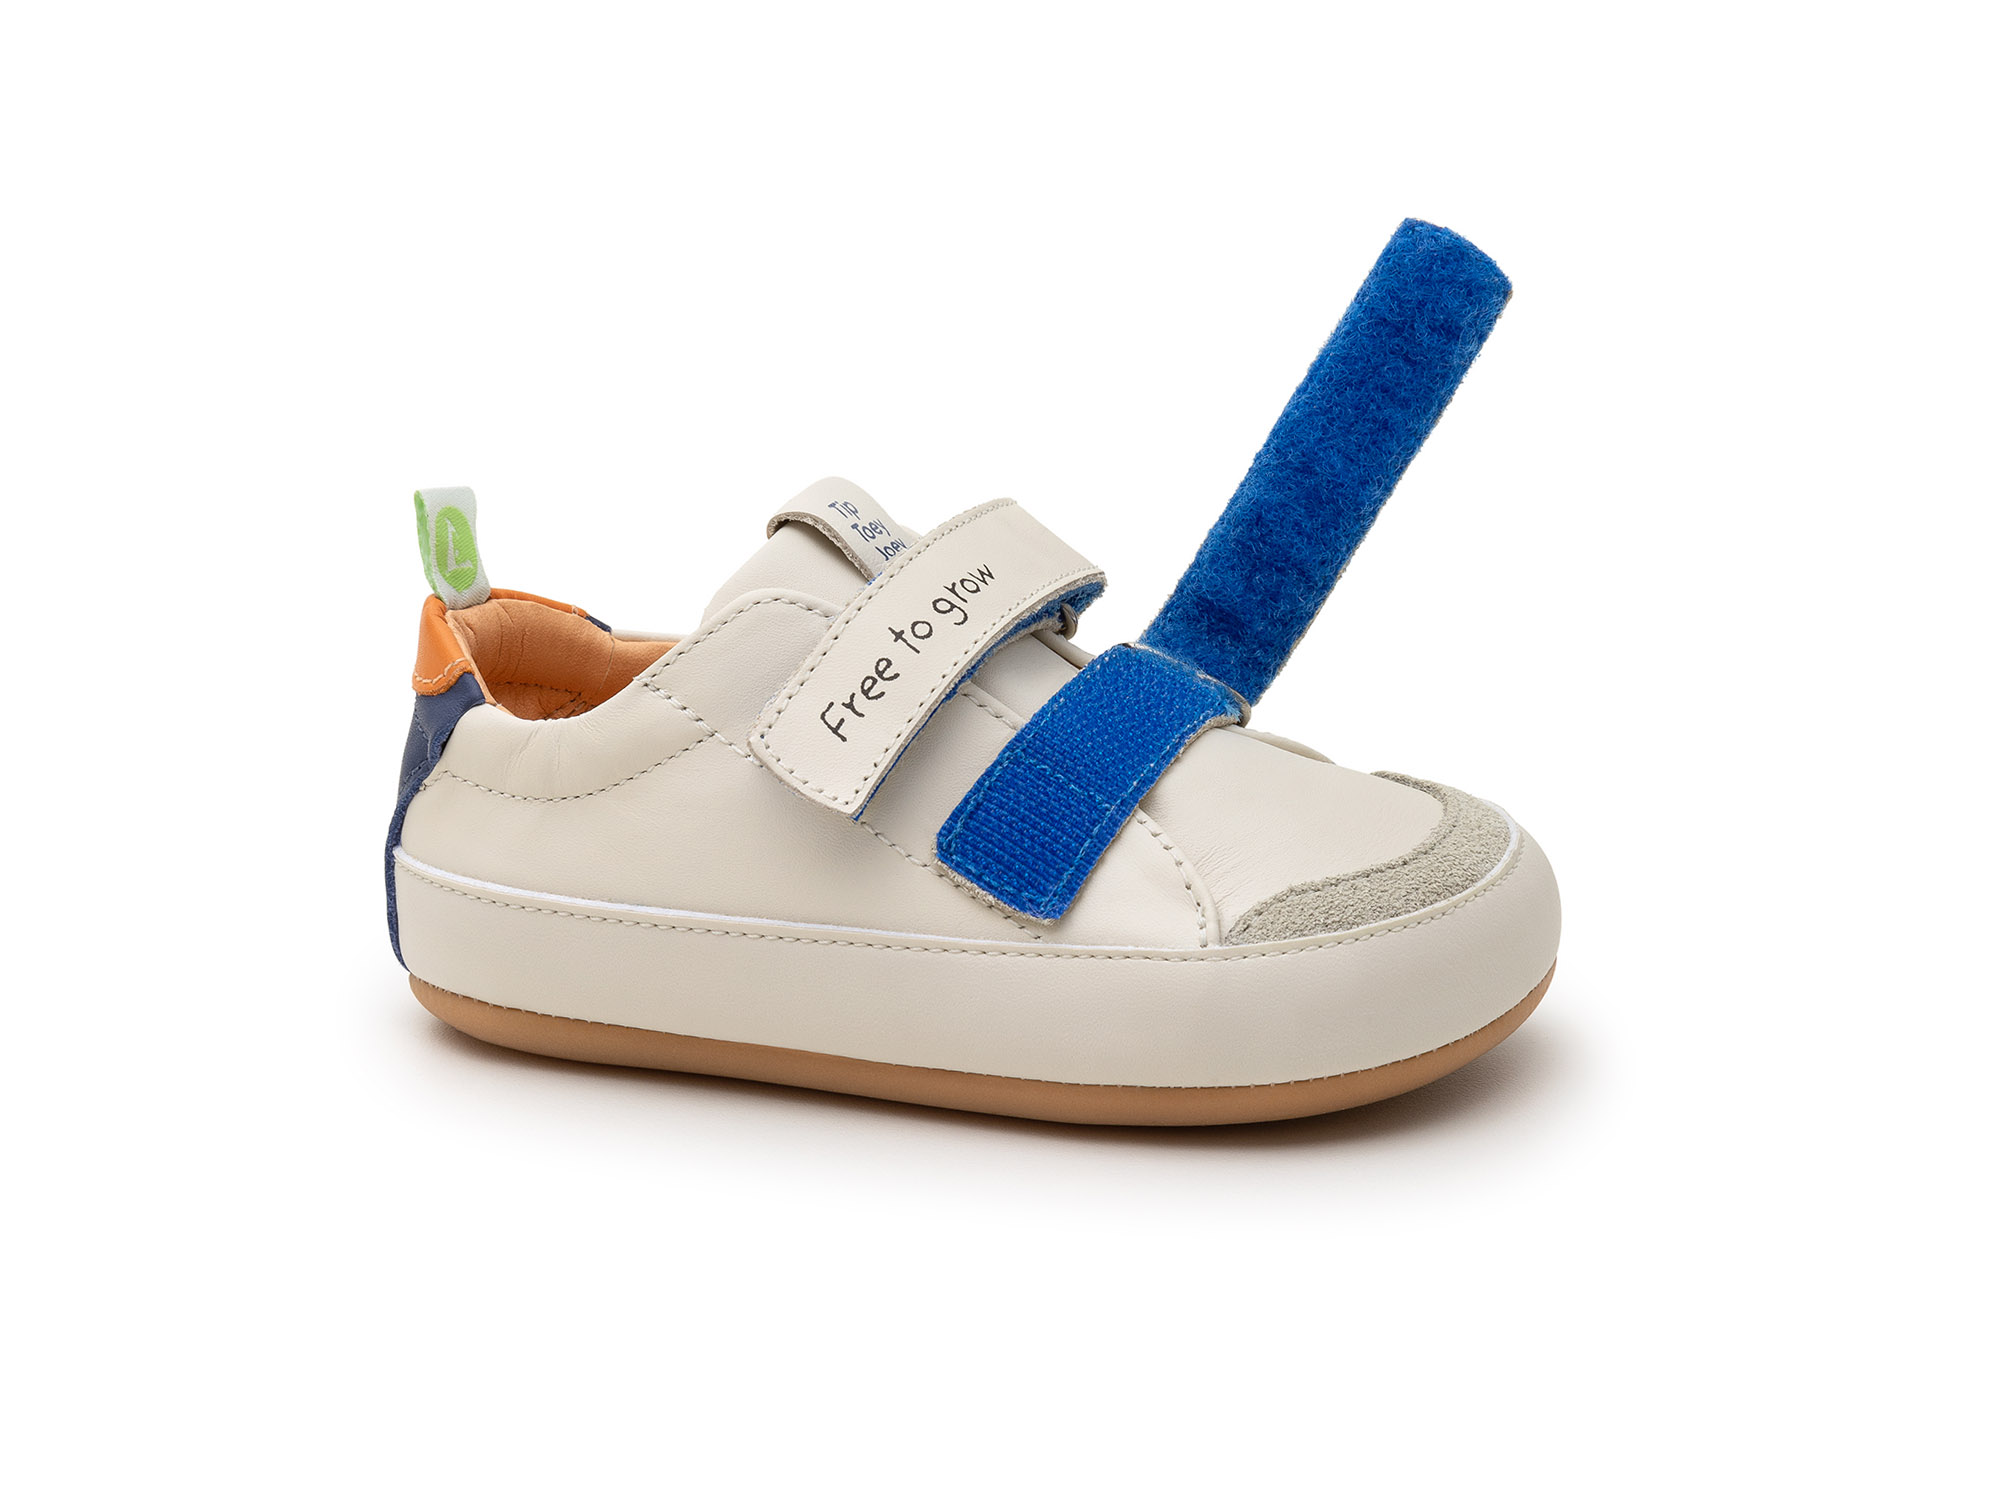 UP & GO Sneakers for Boys Bossy Play | Tip Toey Joey - Australia - 6